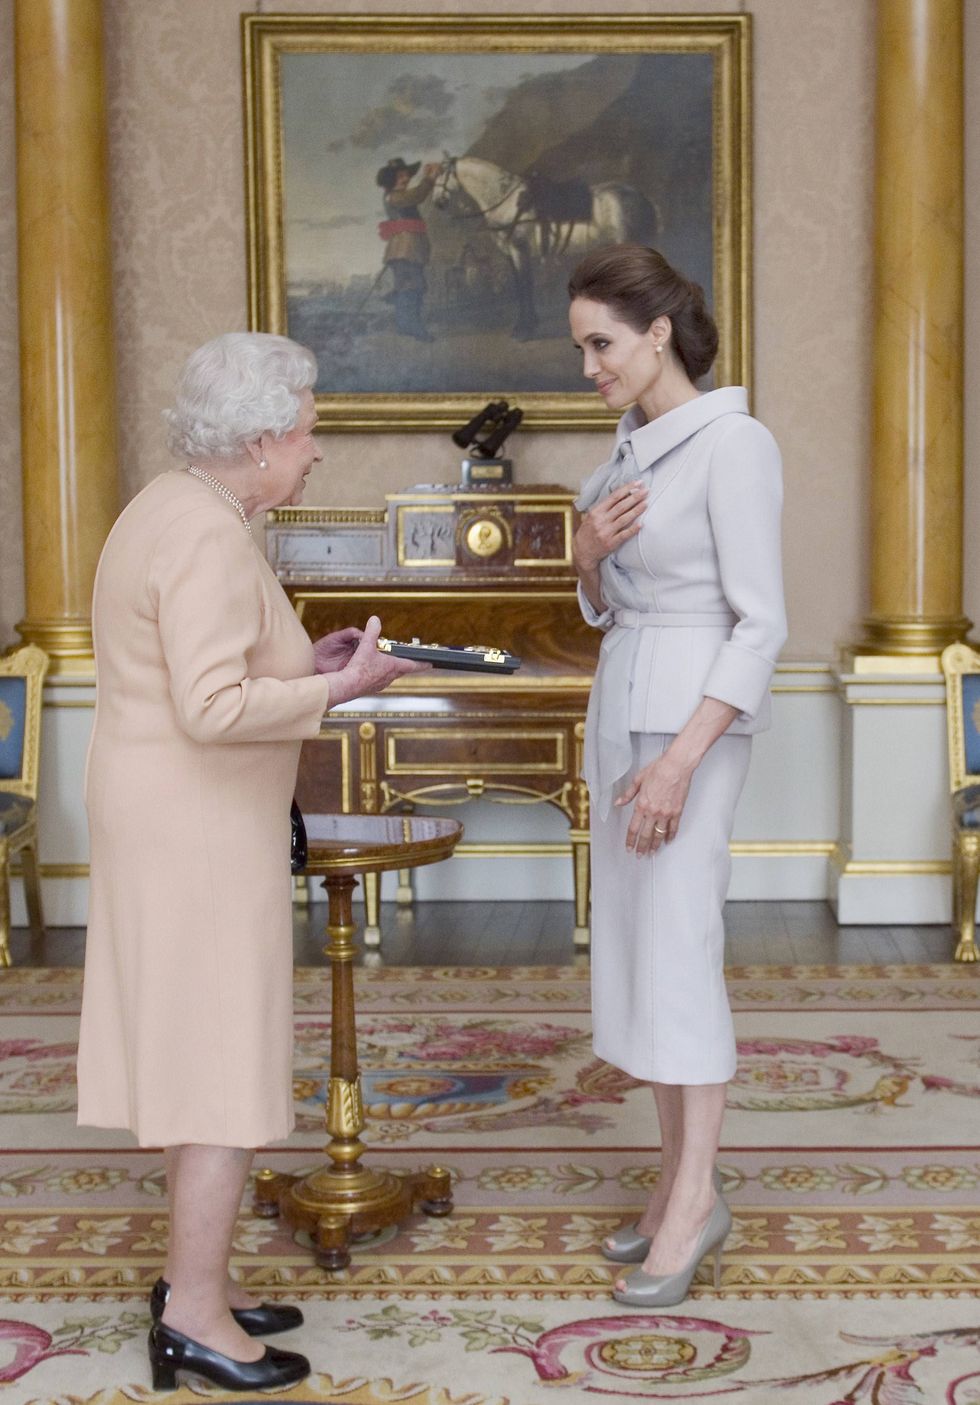 us actress angelina jolie r is presented with the insignia of an honorary dame grand cross of the most distinguished order of st michael and st george by britain's queen elizabeth ii in the 1844 room at buckingham palace in central london, on october 10, 2014 angelina jolie was awarded an honorary damehood dcmg for services to uk foreign policy and the campaign to end war zone sexual violence afp photoanthony devlinpool photo credit should read anthony devlinafp via getty images